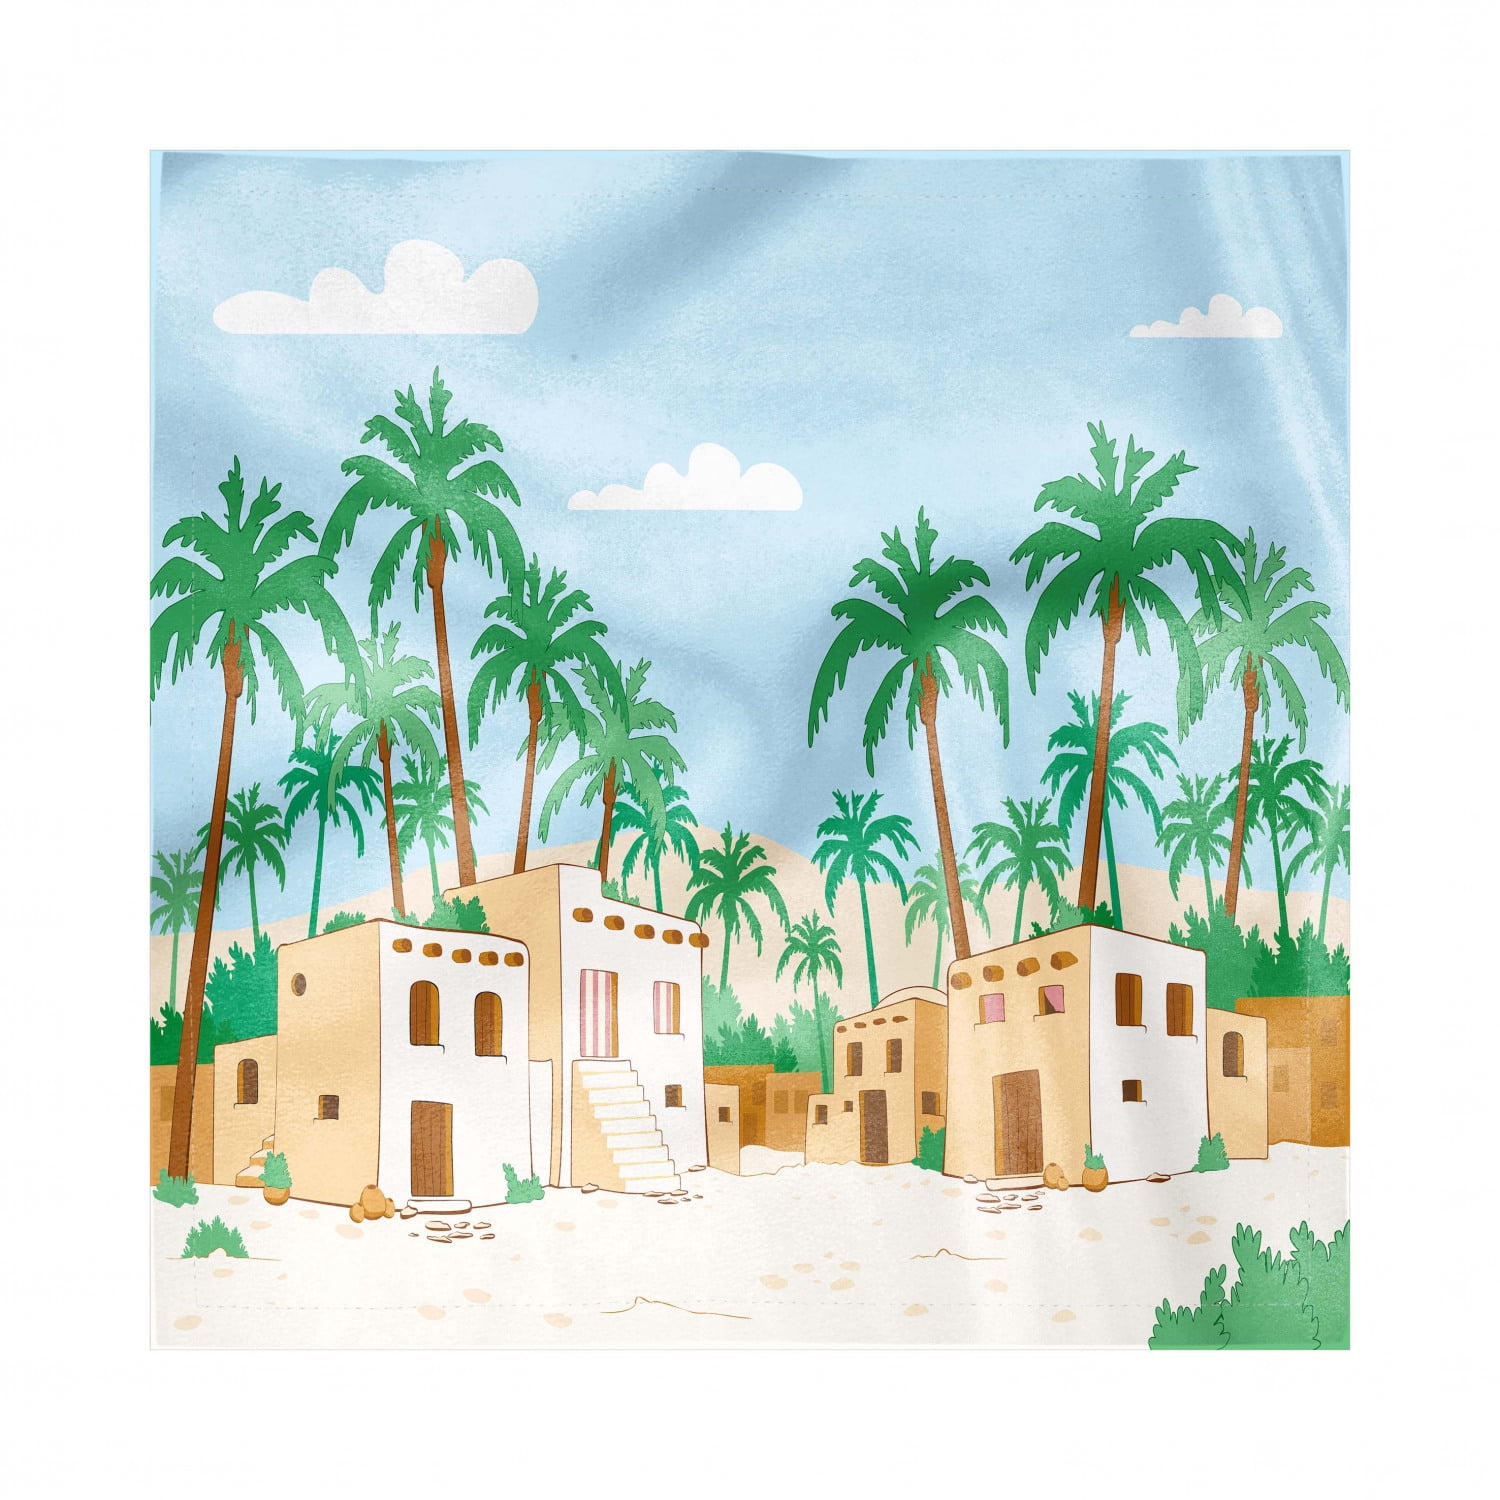 Standard Size Exotic Landscape Photo of Tropical Tall Palm Tree Silhouette and Ocean at Dawn Ambesonne Sunset Place Mats Set of 4 Multicolor Washable Fabric Placemats for Dining Table